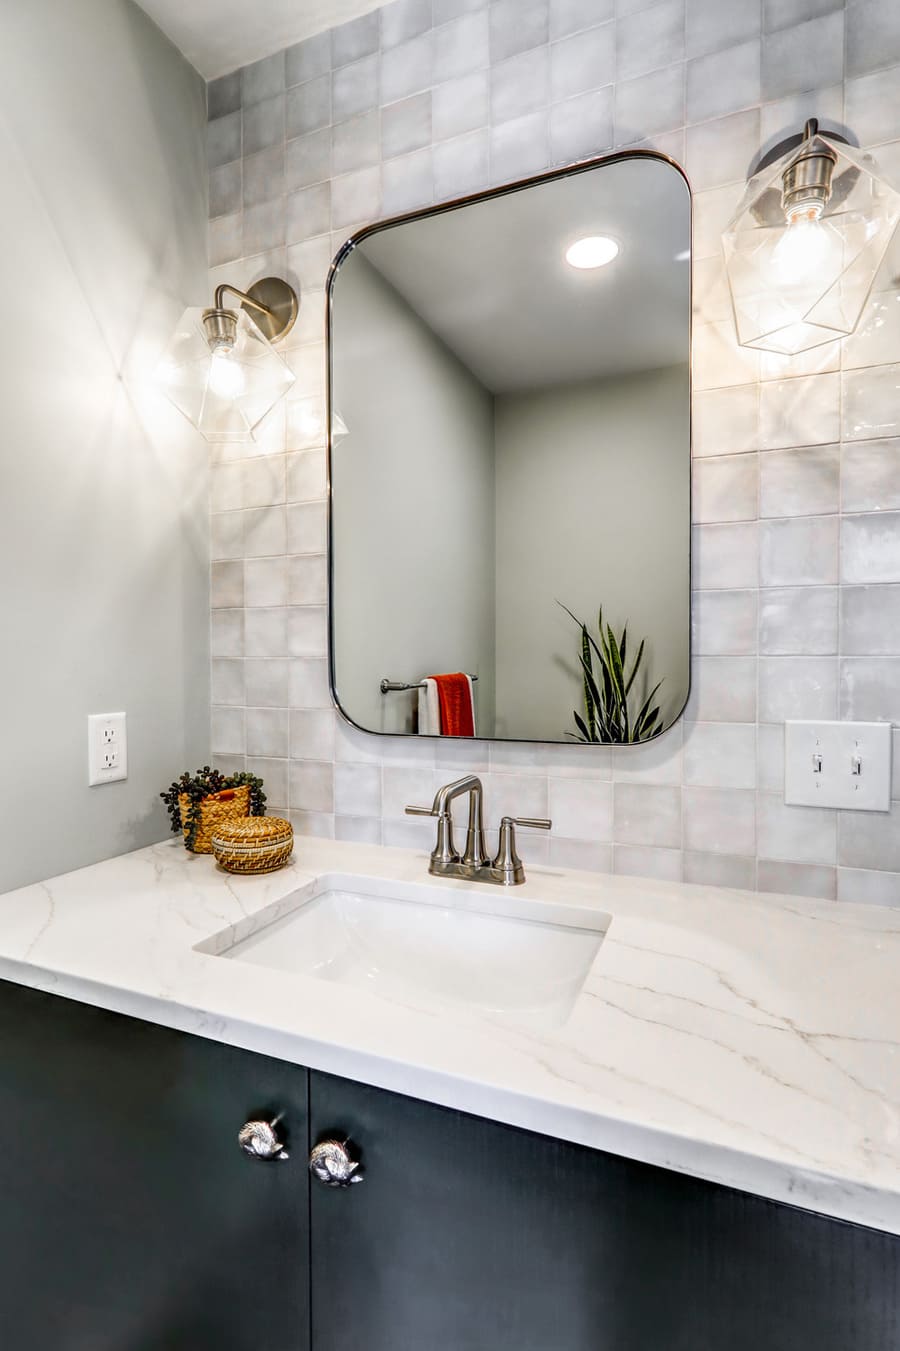 Rohrerstown Bathroom Remodel with quartz countertop and pendant lights